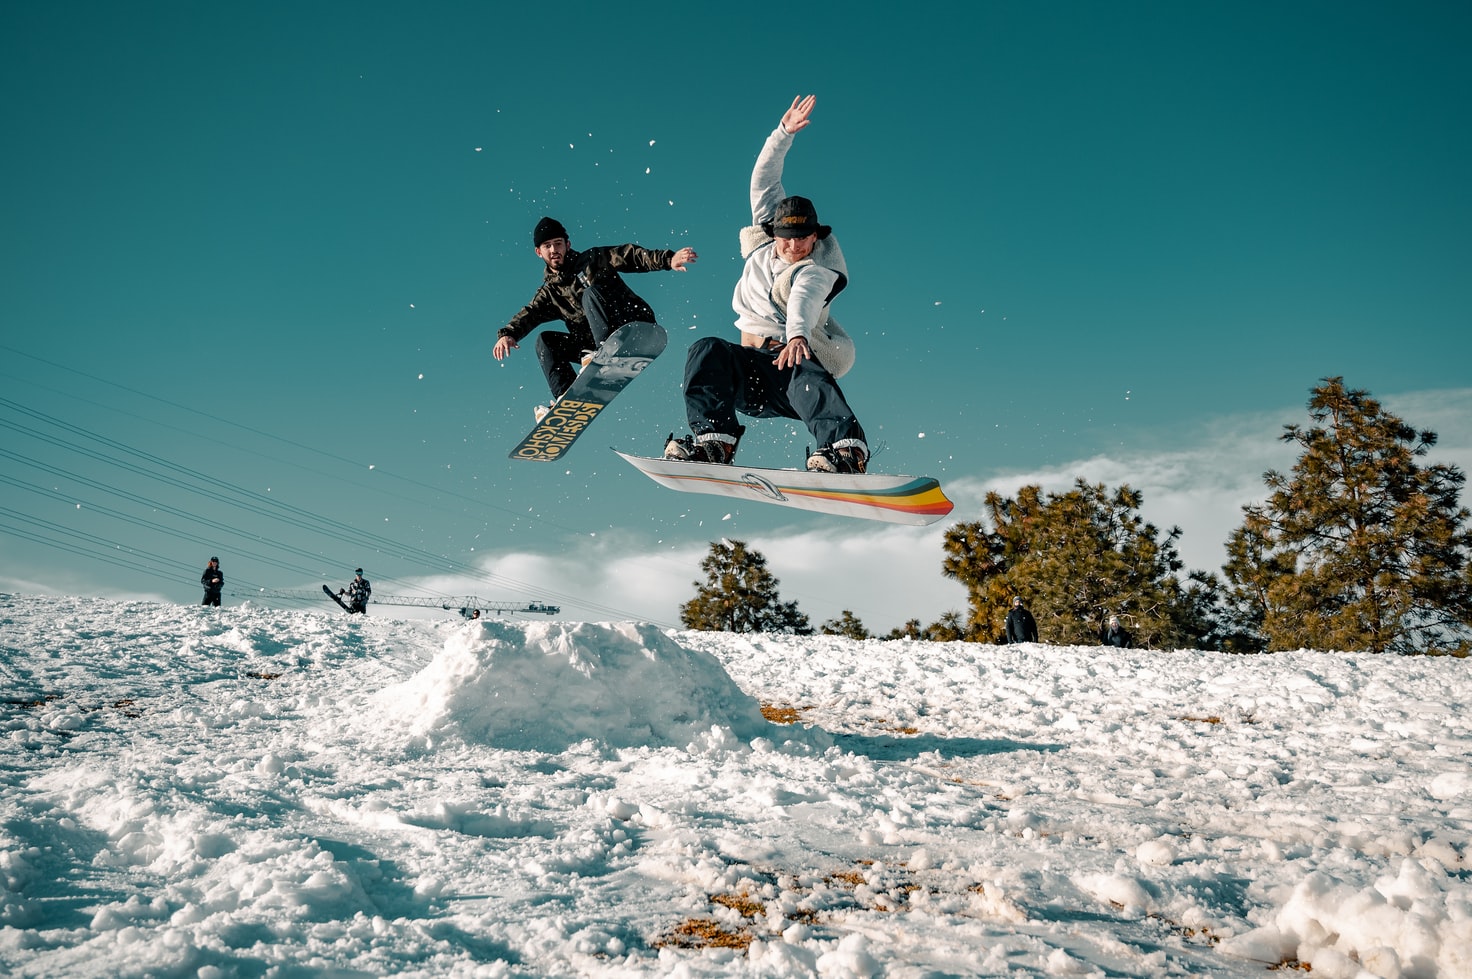 Cost of Planning a Snowboarding Trip – Expenses Incurred & Tips on Budgeting